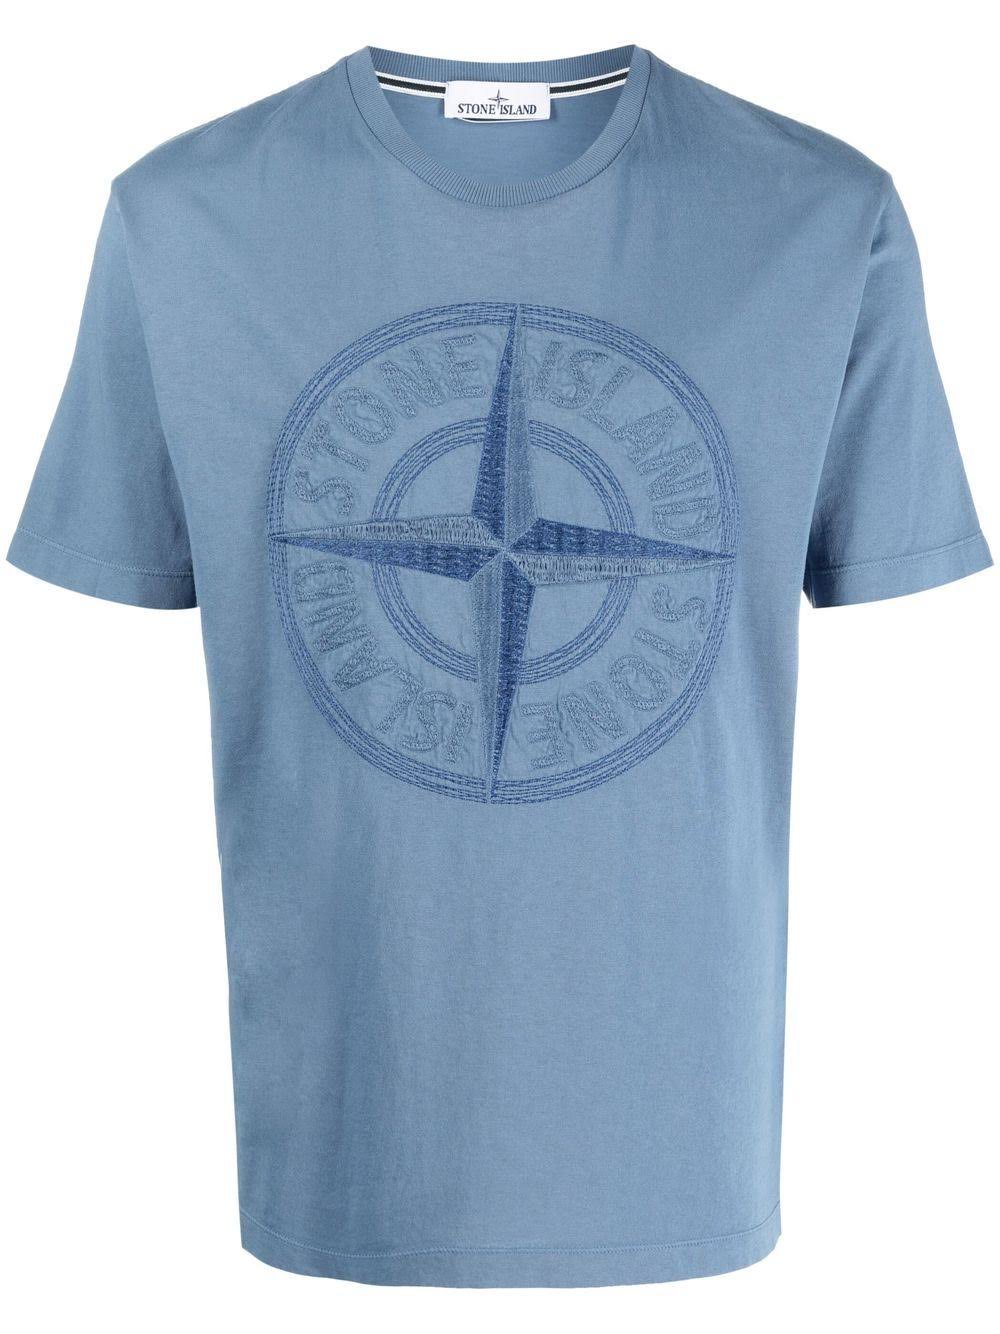 Stone Island Embroidered Logo T-Shirt in Blue